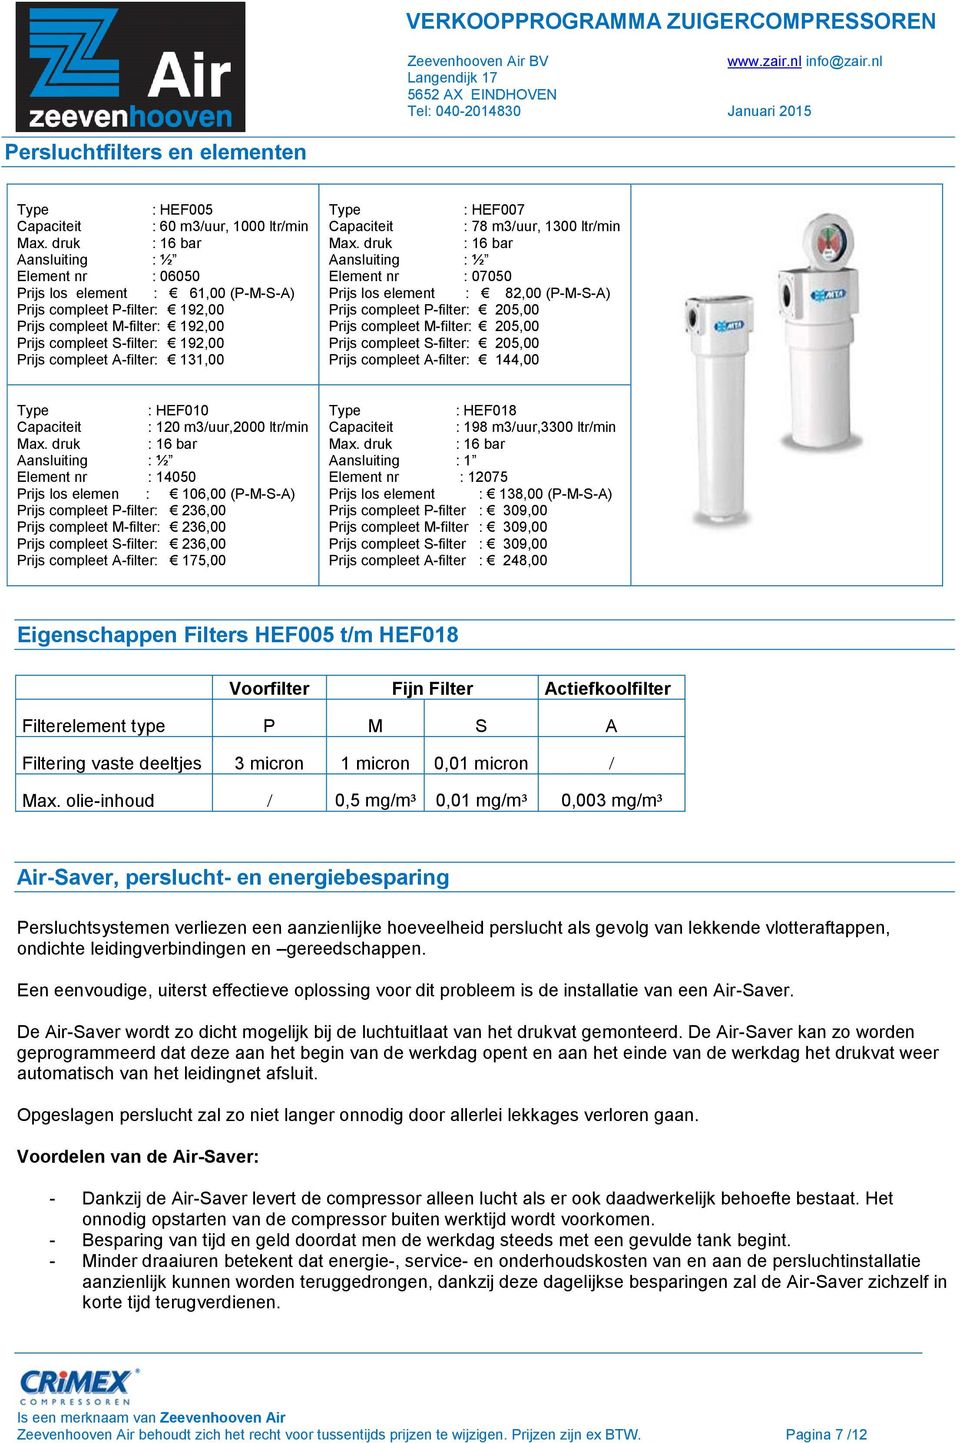 A-filter: 131,00 Type : HEF007 Capaciteit : 78 m3/uur, 1300 ltr/min Max.